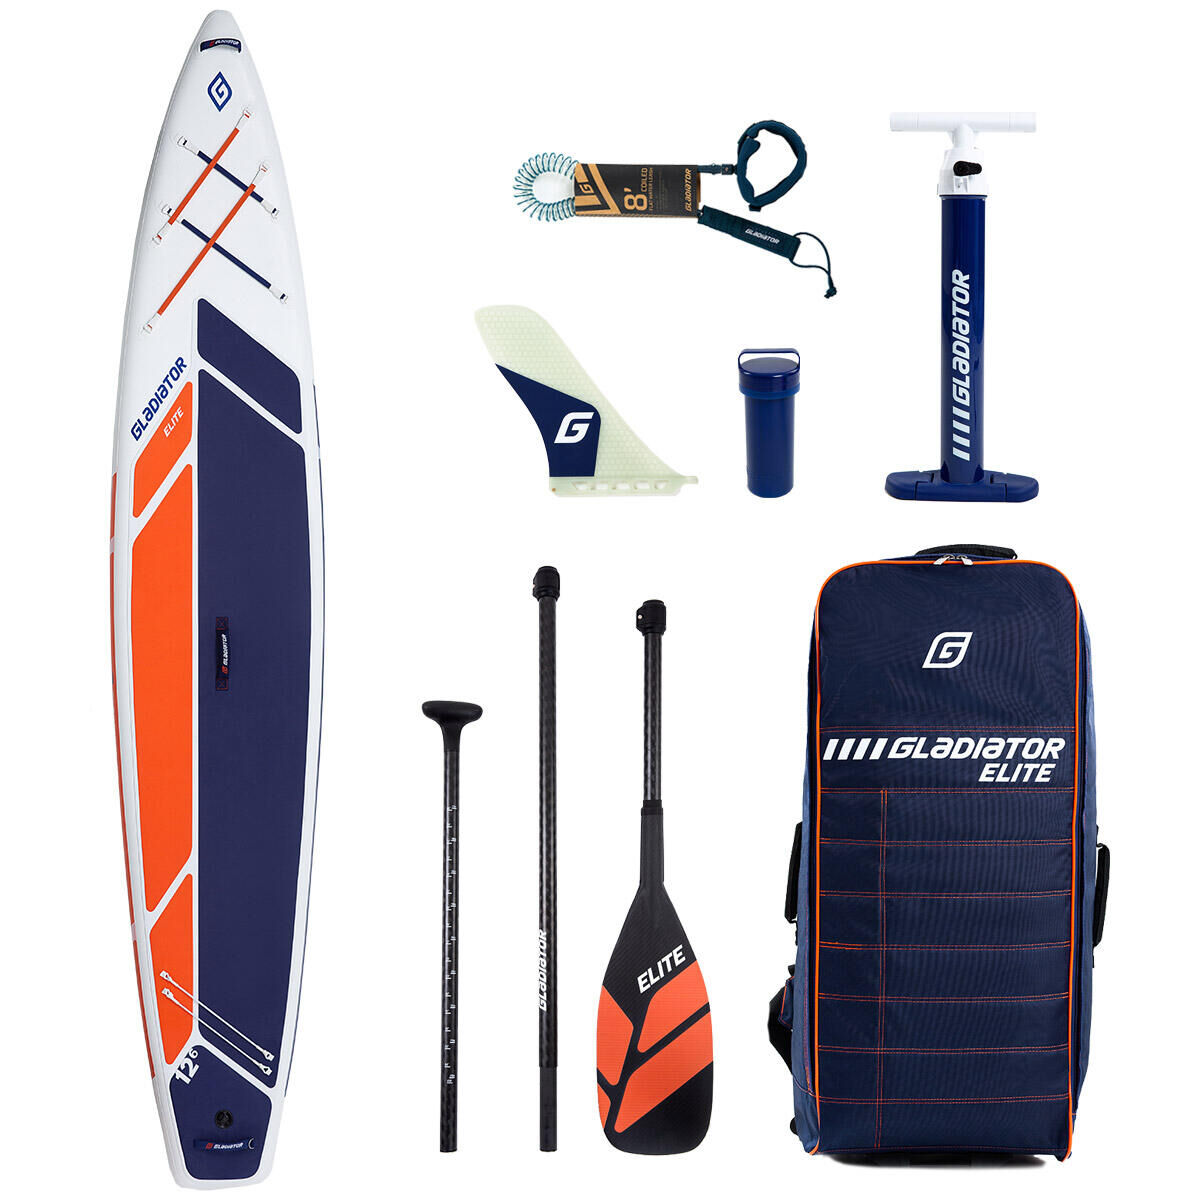 GLADIATOR Gladiator Elite Sport 12'6 x 30” x 5.9” Touring Paddle Board For More Speed